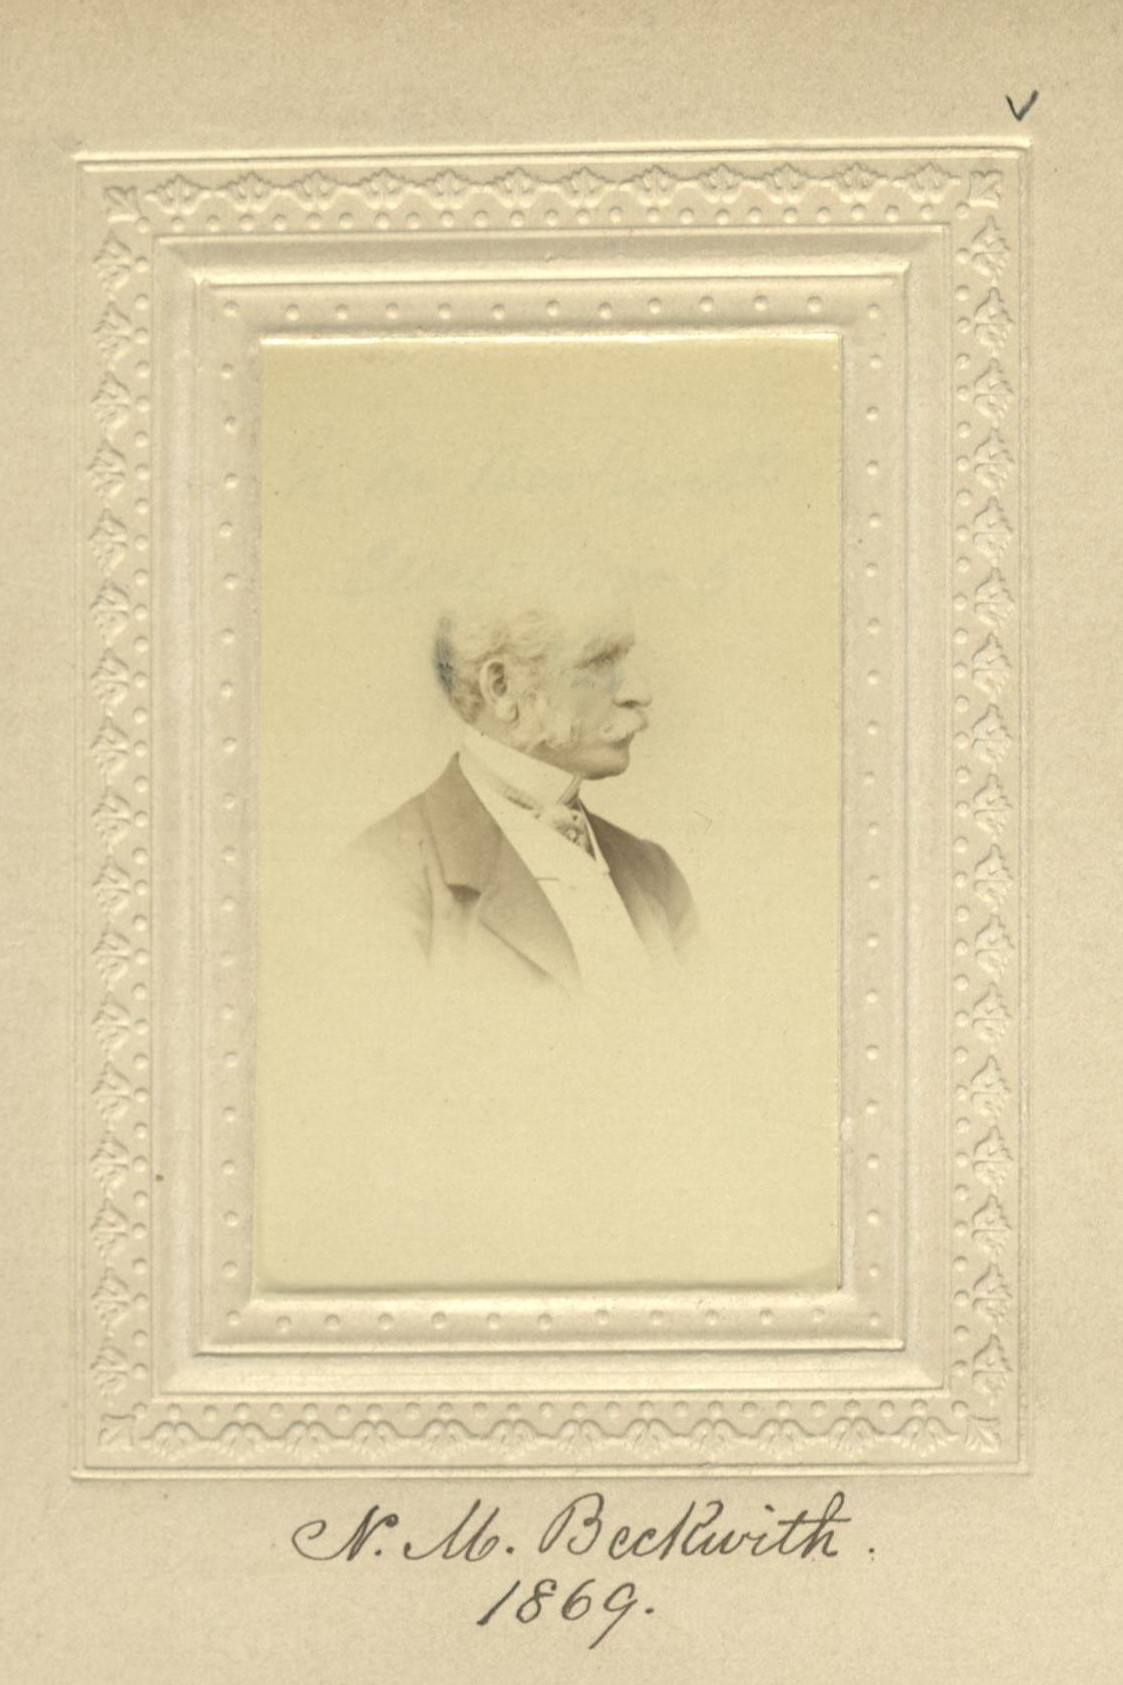 Member portrait of N. M. Beckwith